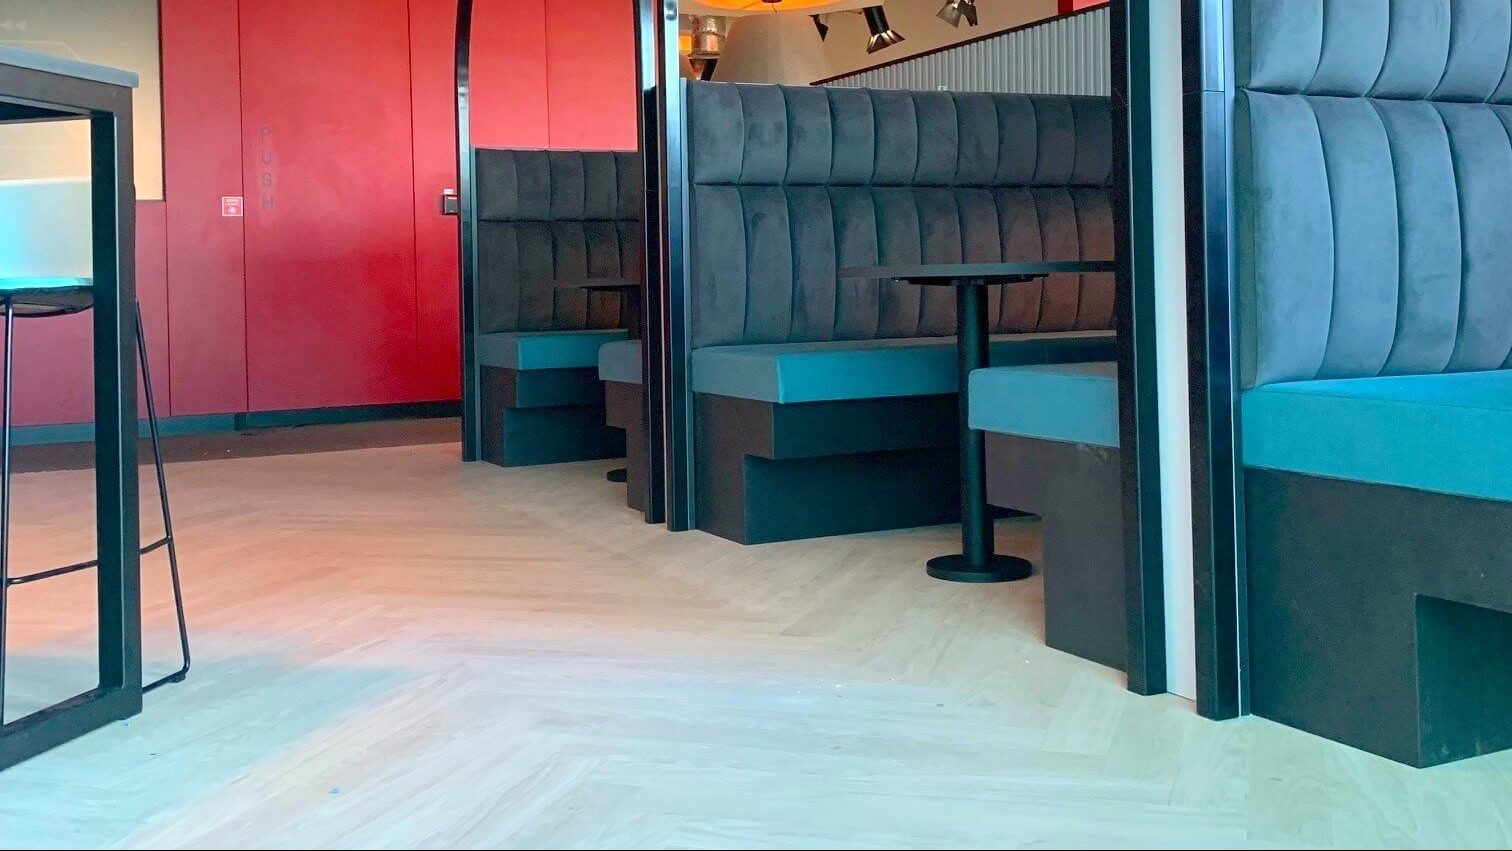 Bespoke seating booths designed by Gralyn Joinery featuring architectural metal hoops